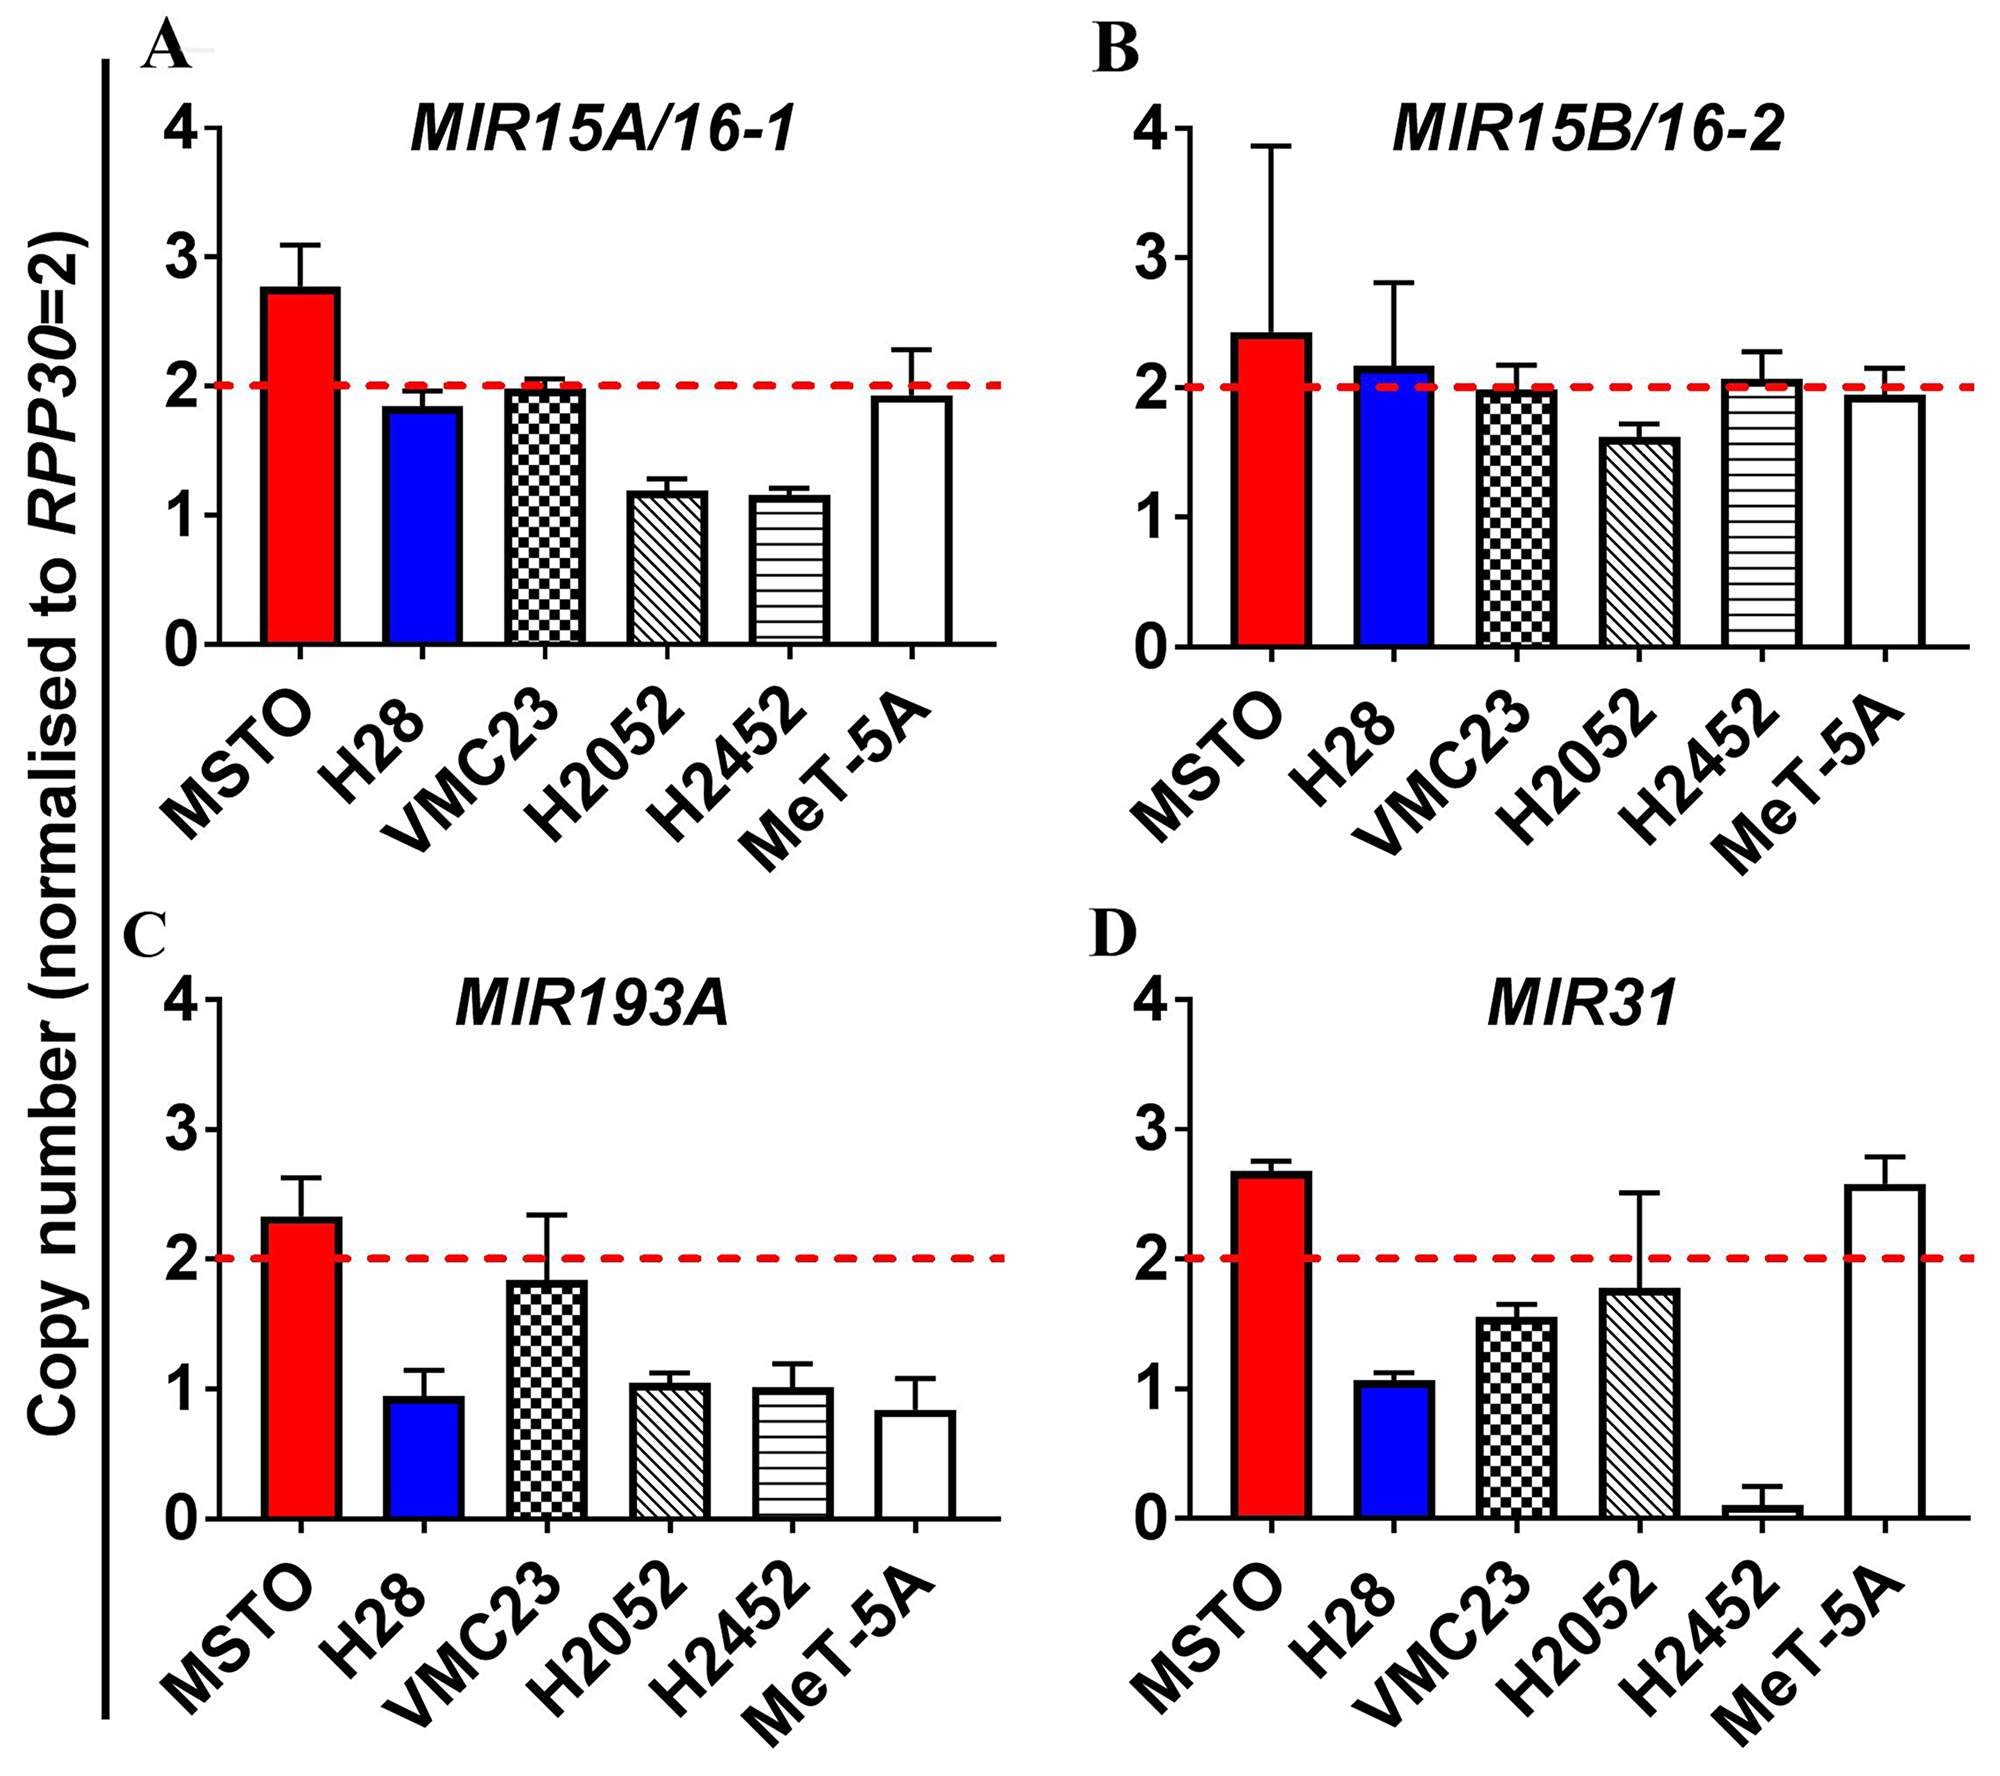 Analysis of copy number variation (CNV) of miRNA genes in MPM reveals allelic loss of the MIR193A and to a lesser extent MIR15A/16-1, but not MIR15B/MIR16-2.